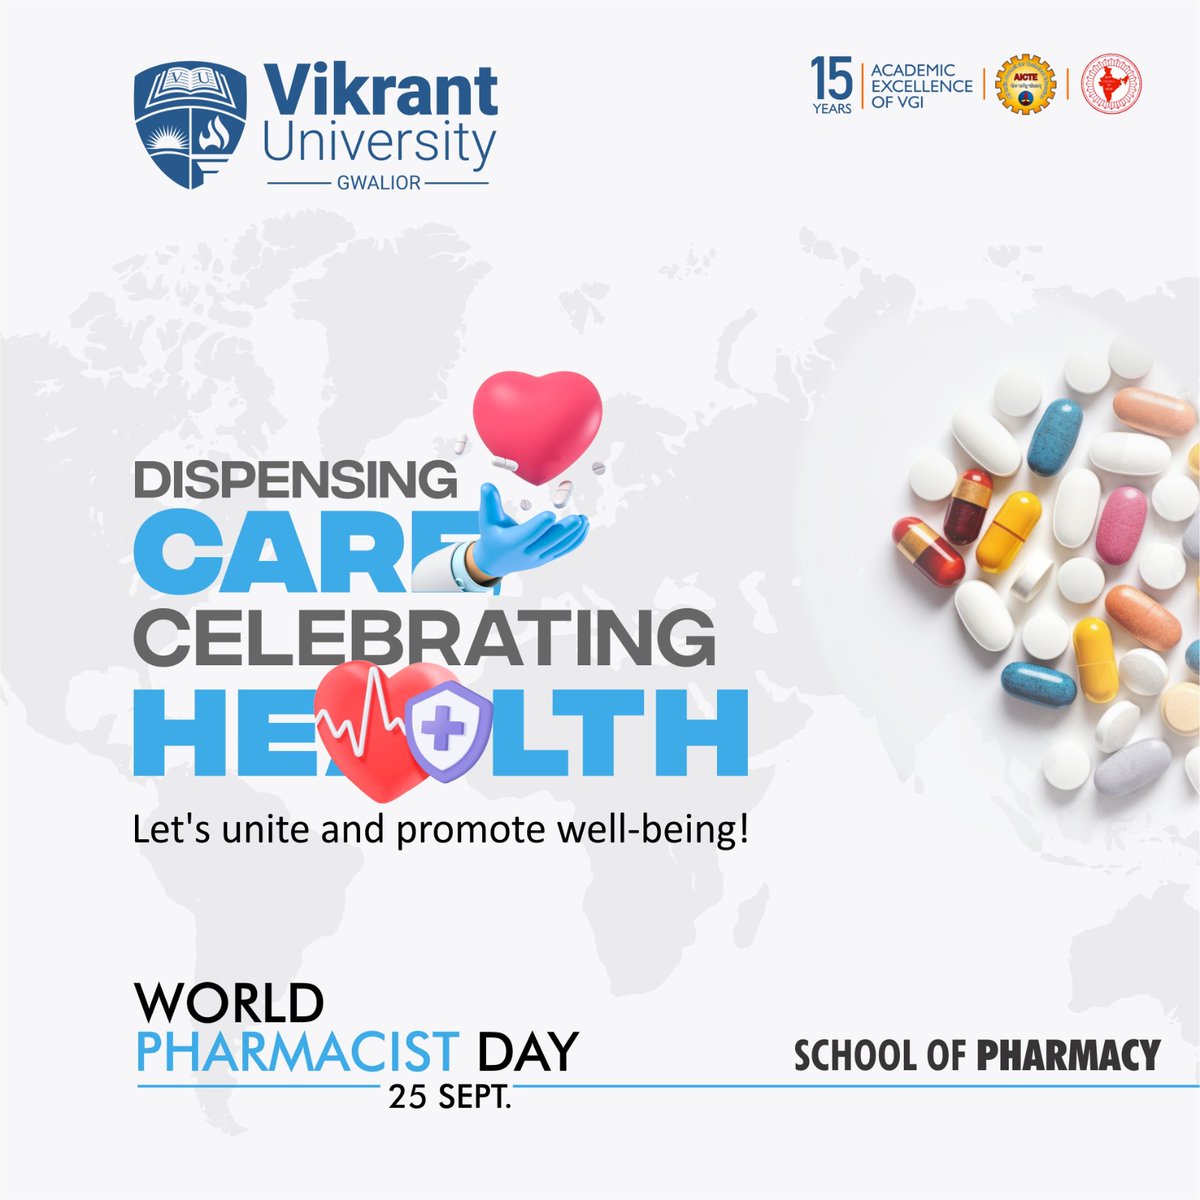 On this World Pharmacist Day, let's Celebrate the relentless efforts of the unsung heroes of healthcare sector.

#WorldPharmacistDay #PharmacyDay #Pharmacy #SchoolOfPharmacy #VikrantUniversity #VikrantGroupofInstitutions #Gwalior #Indore #MadhyaPradesh #India